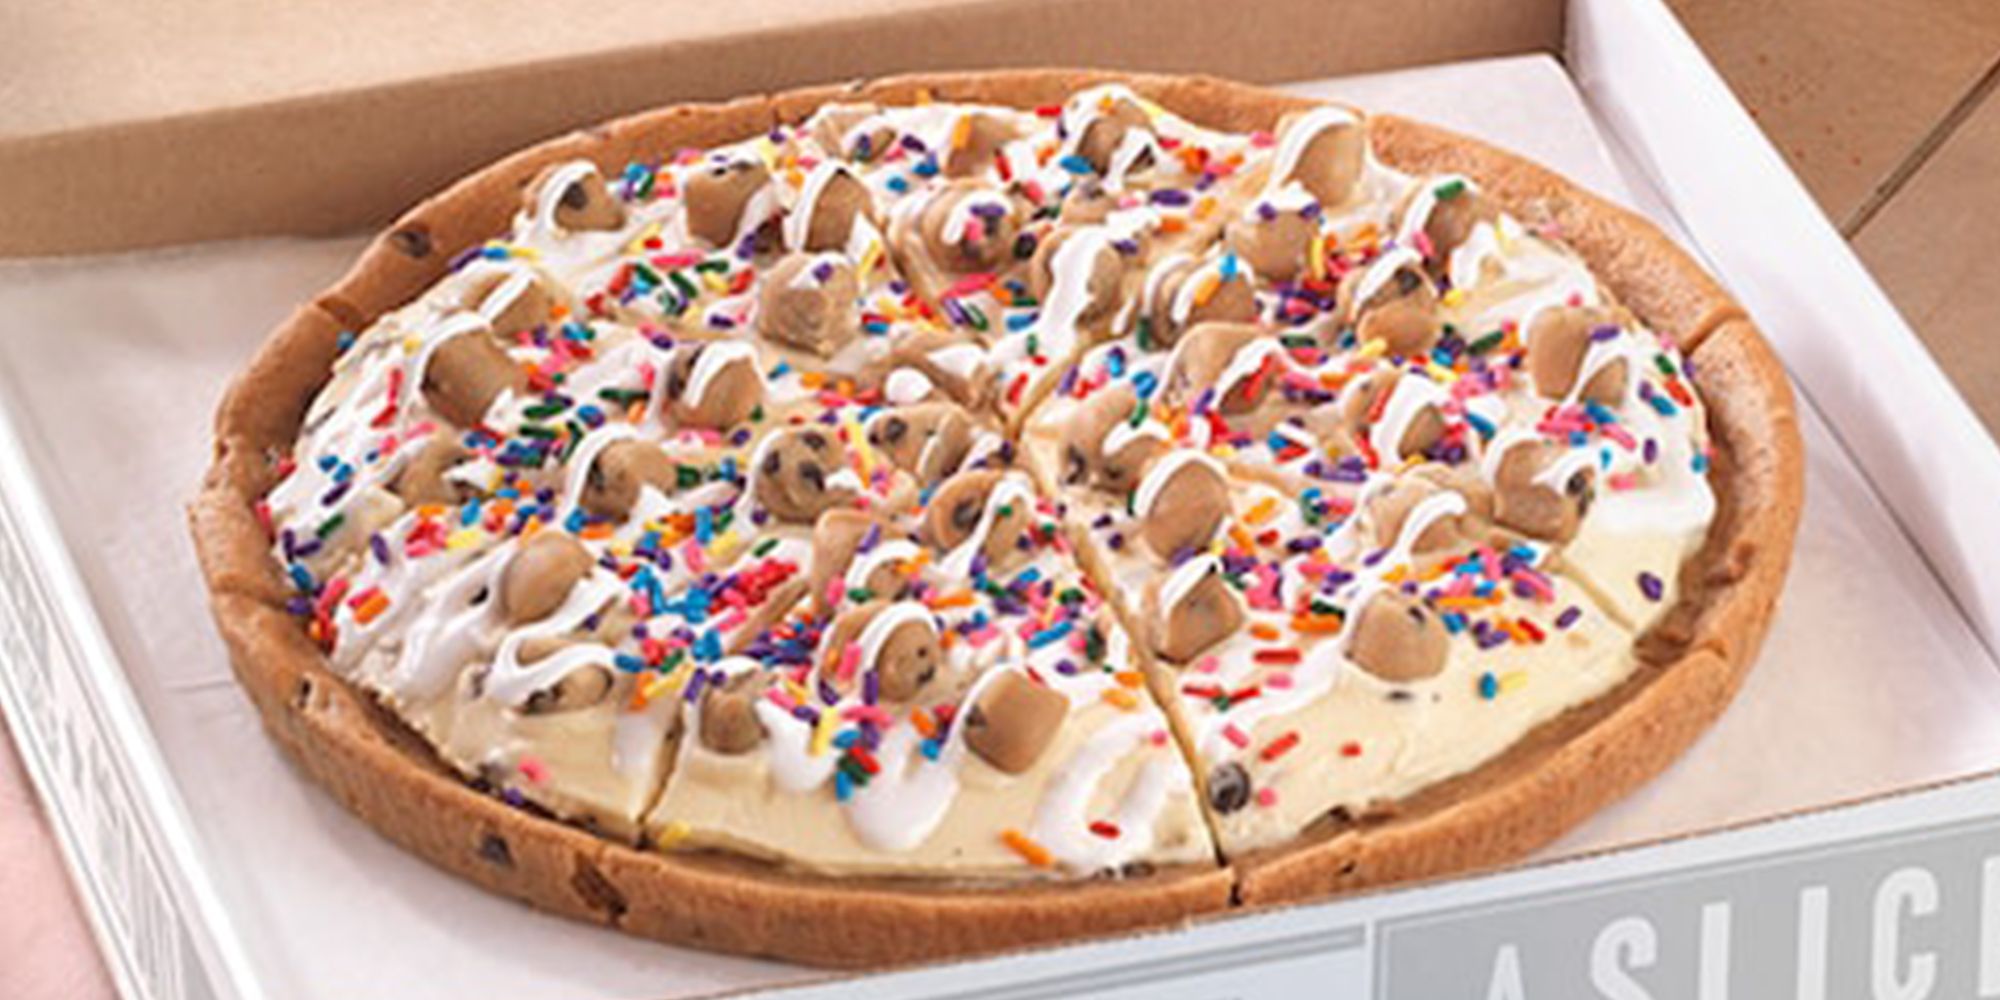 Baskin Robbins' Ice Cream Pizzas With Cookie and Brownie Crusts ...